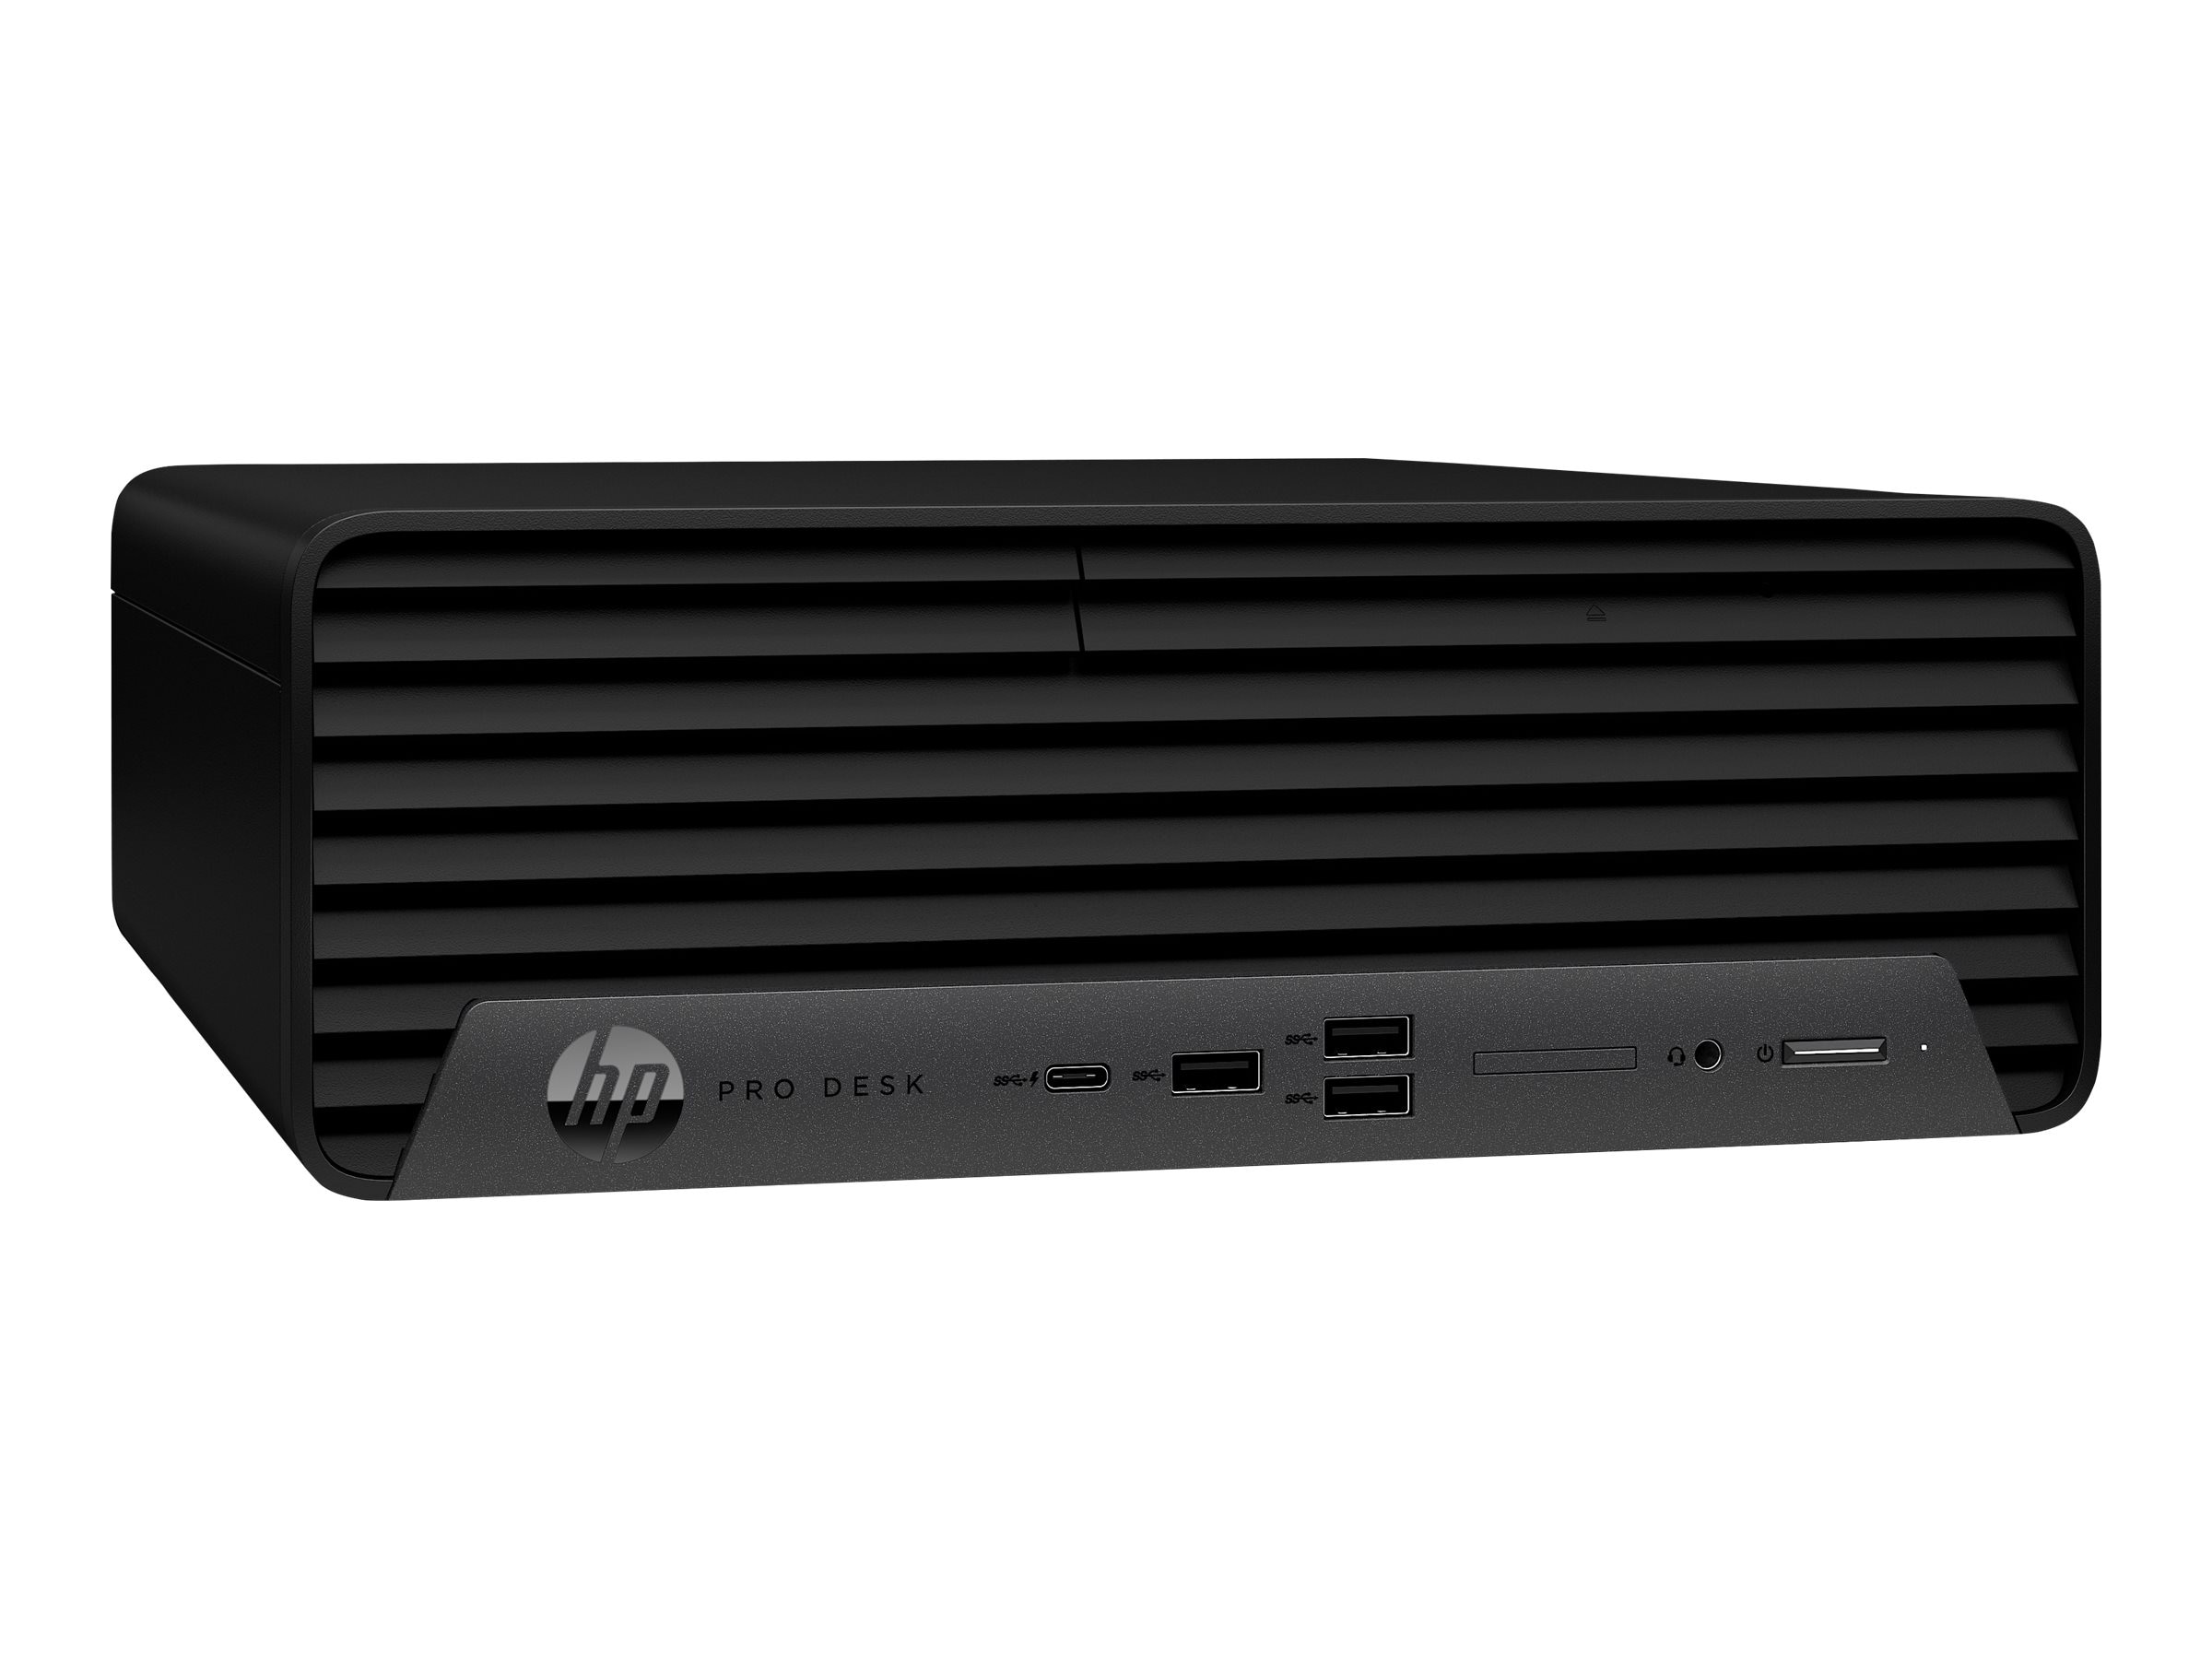 HP ProDesk 400 G1 SFF - 8Go - HDD 2To - LaptopService